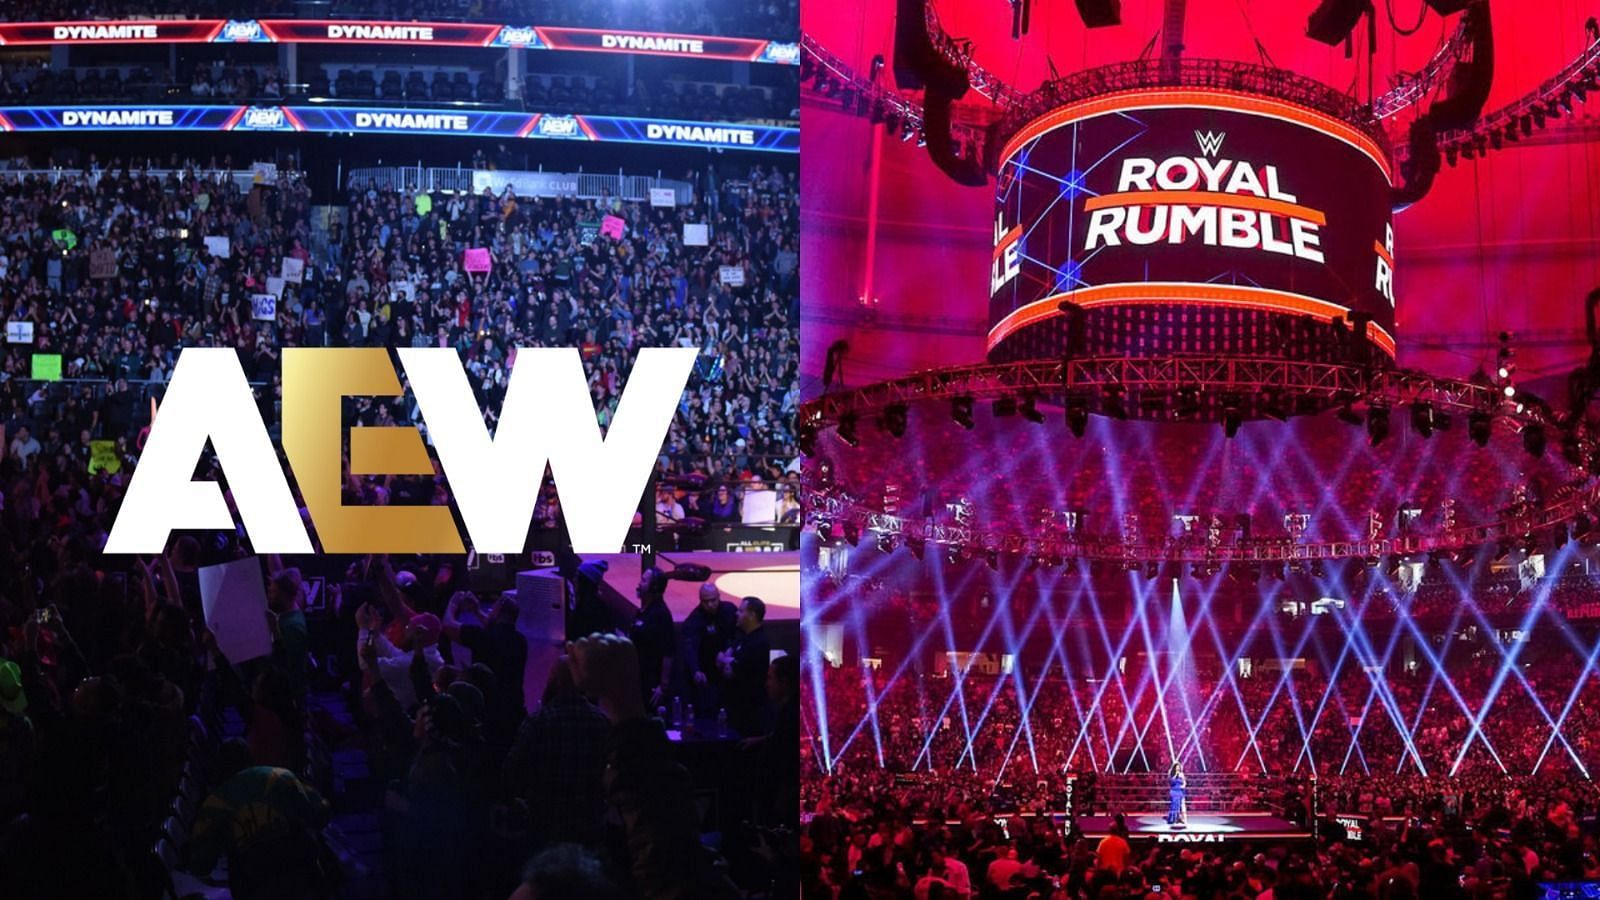 Images taken from AEW and WWE